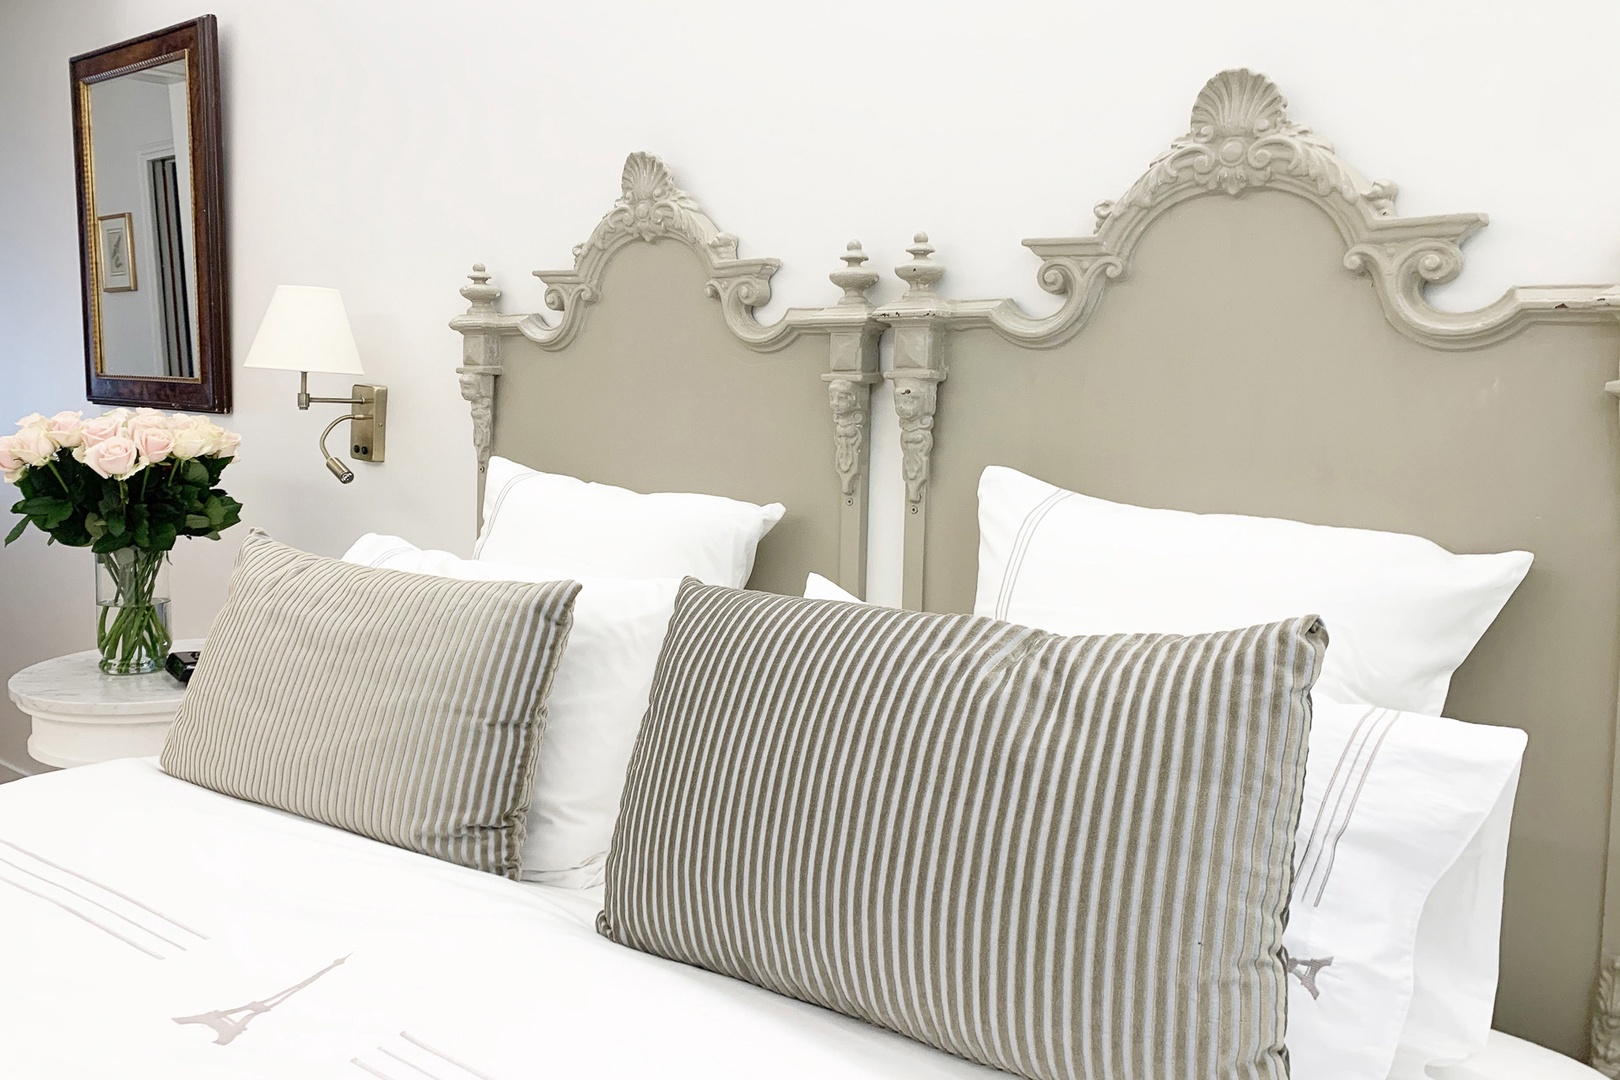 Luxurious Paris Perfect bedding, fit for a royal!